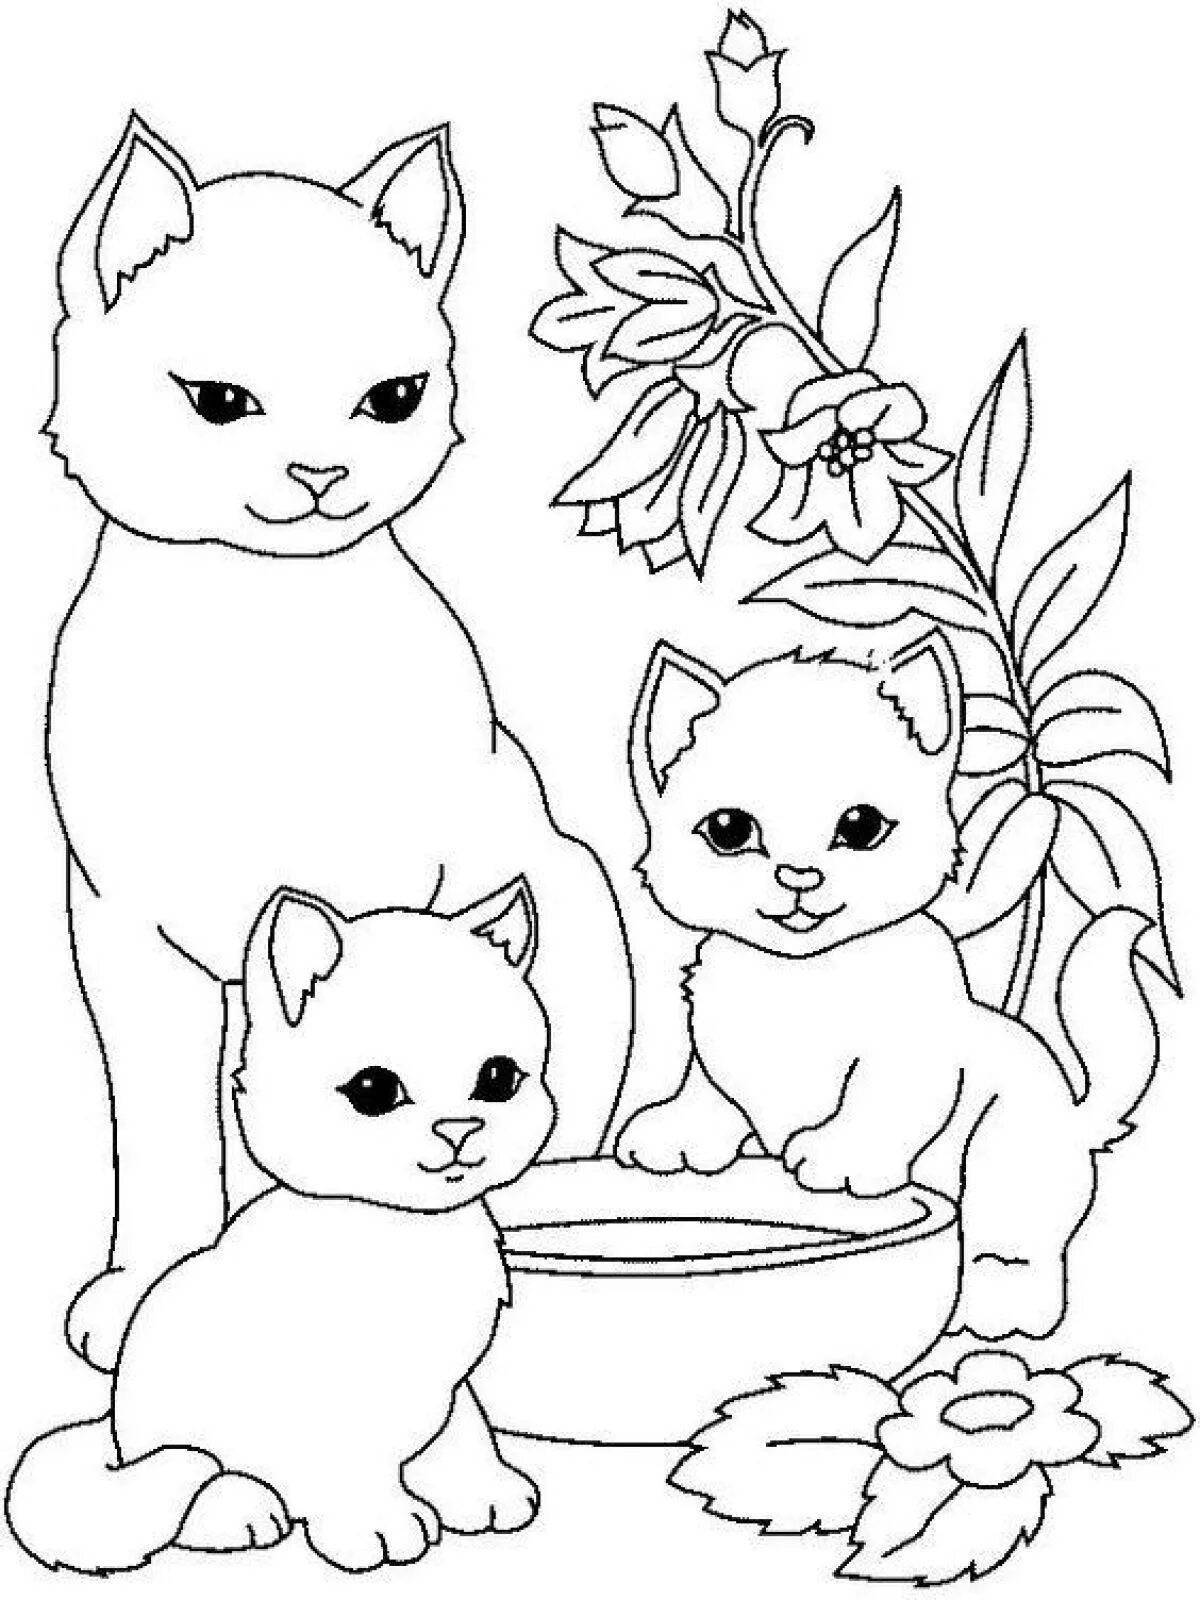 Coloring book for girls with animals